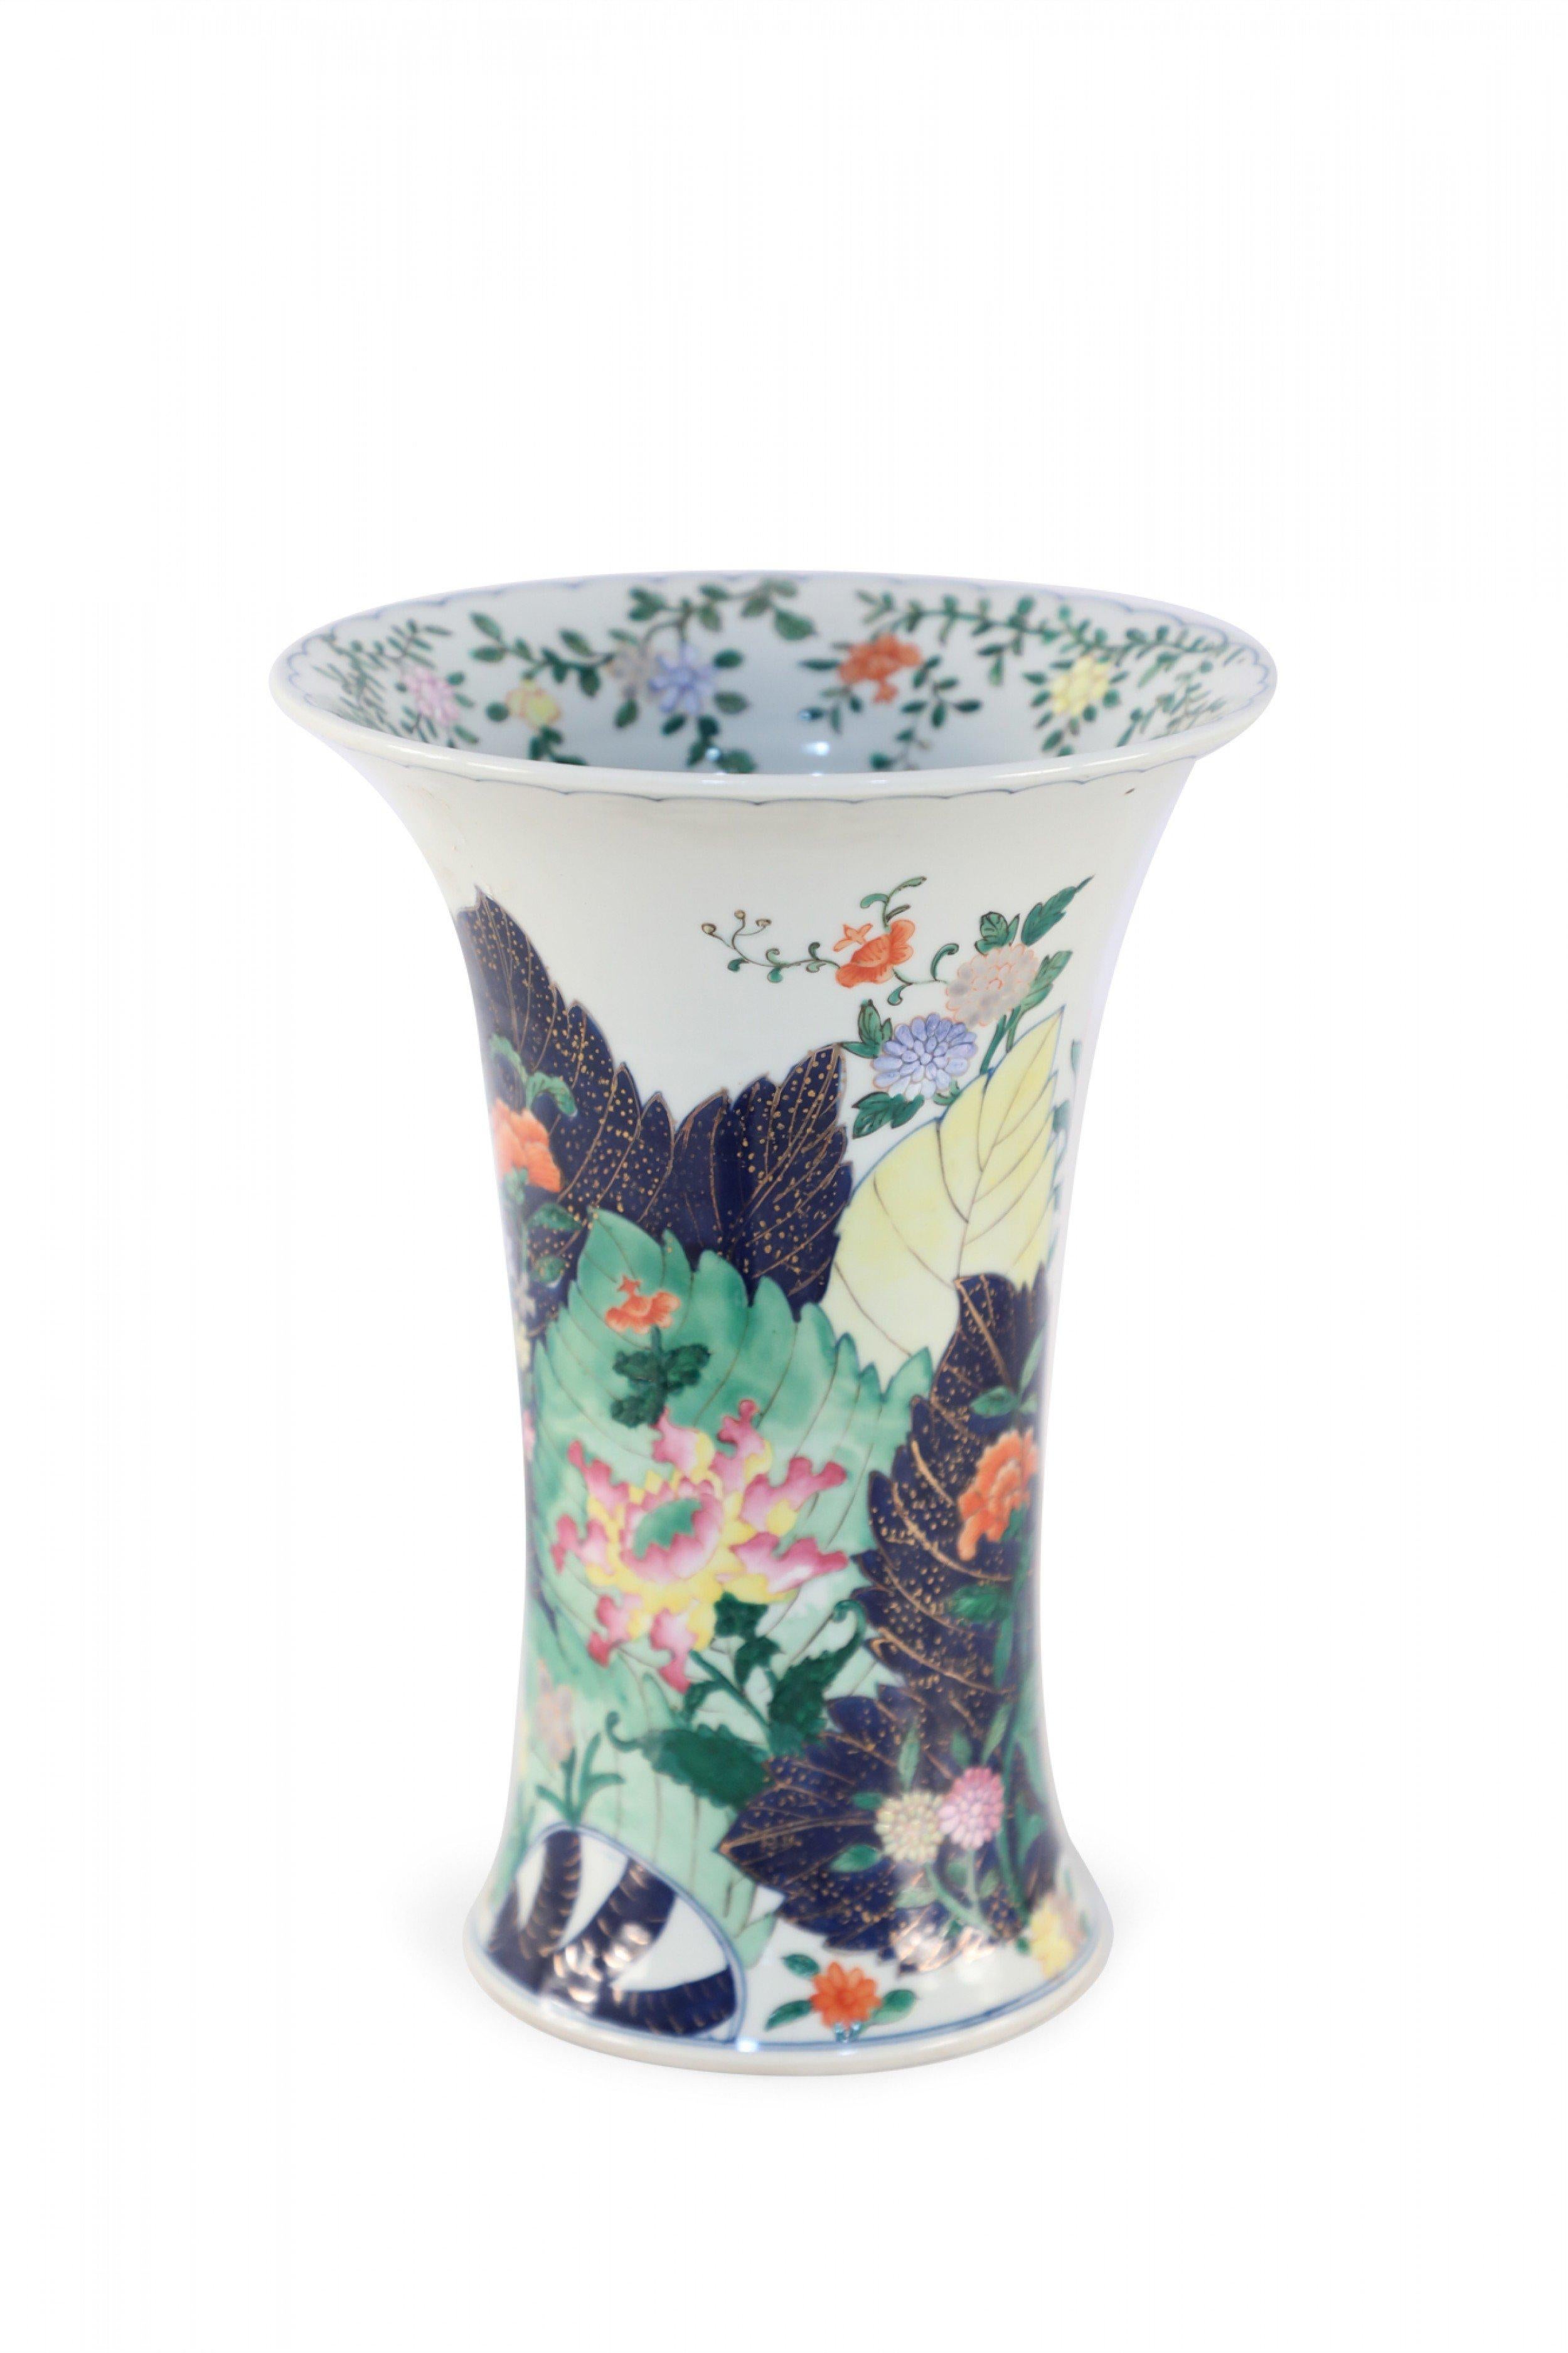 Chinese White Porcelain Peacock and Floral Design Fluted Vase In Good Condition For Sale In New York, NY